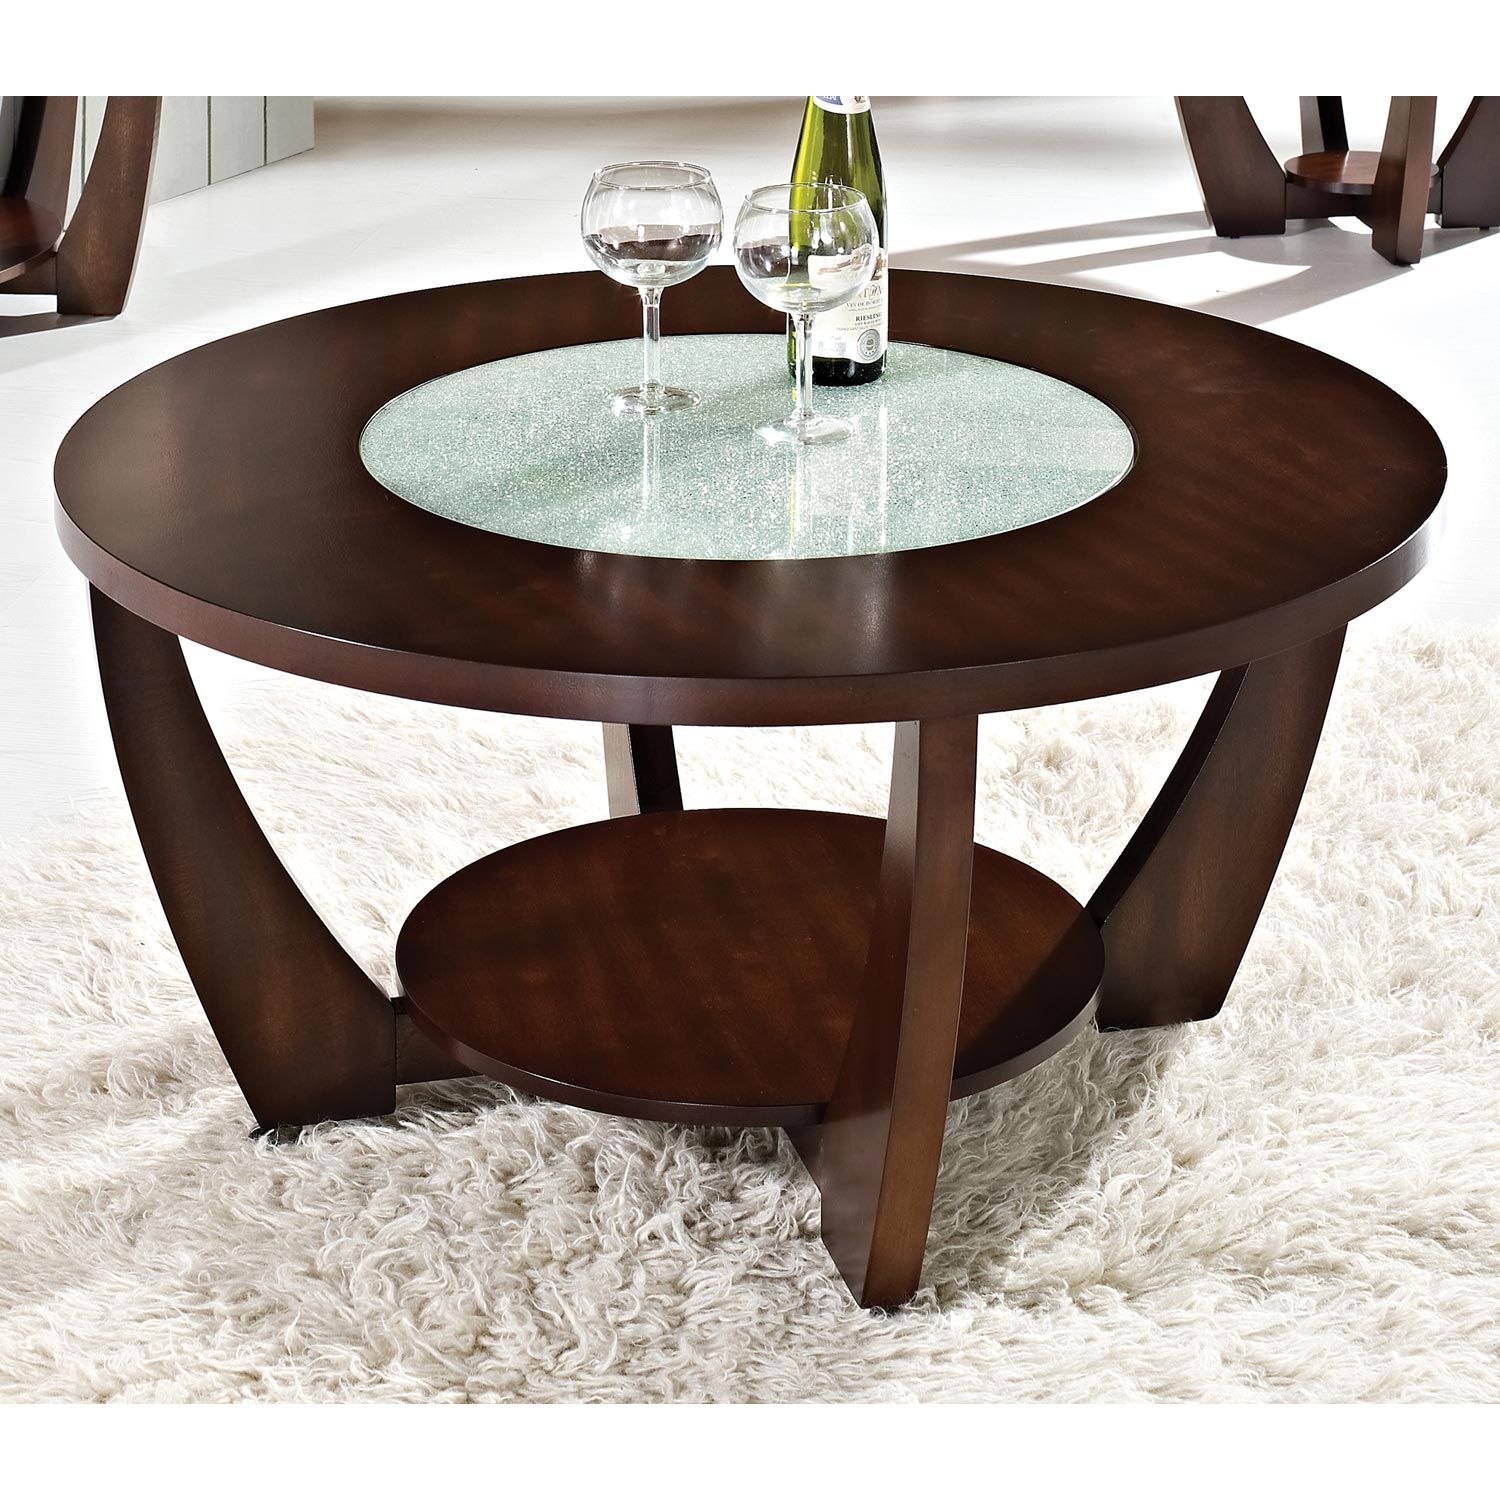 Rafael Round Coffee Table – Crackled Glass, Dark Cherry Wood | Dcg Stores Pertaining To Round Coffee Tables (View 12 of 20)